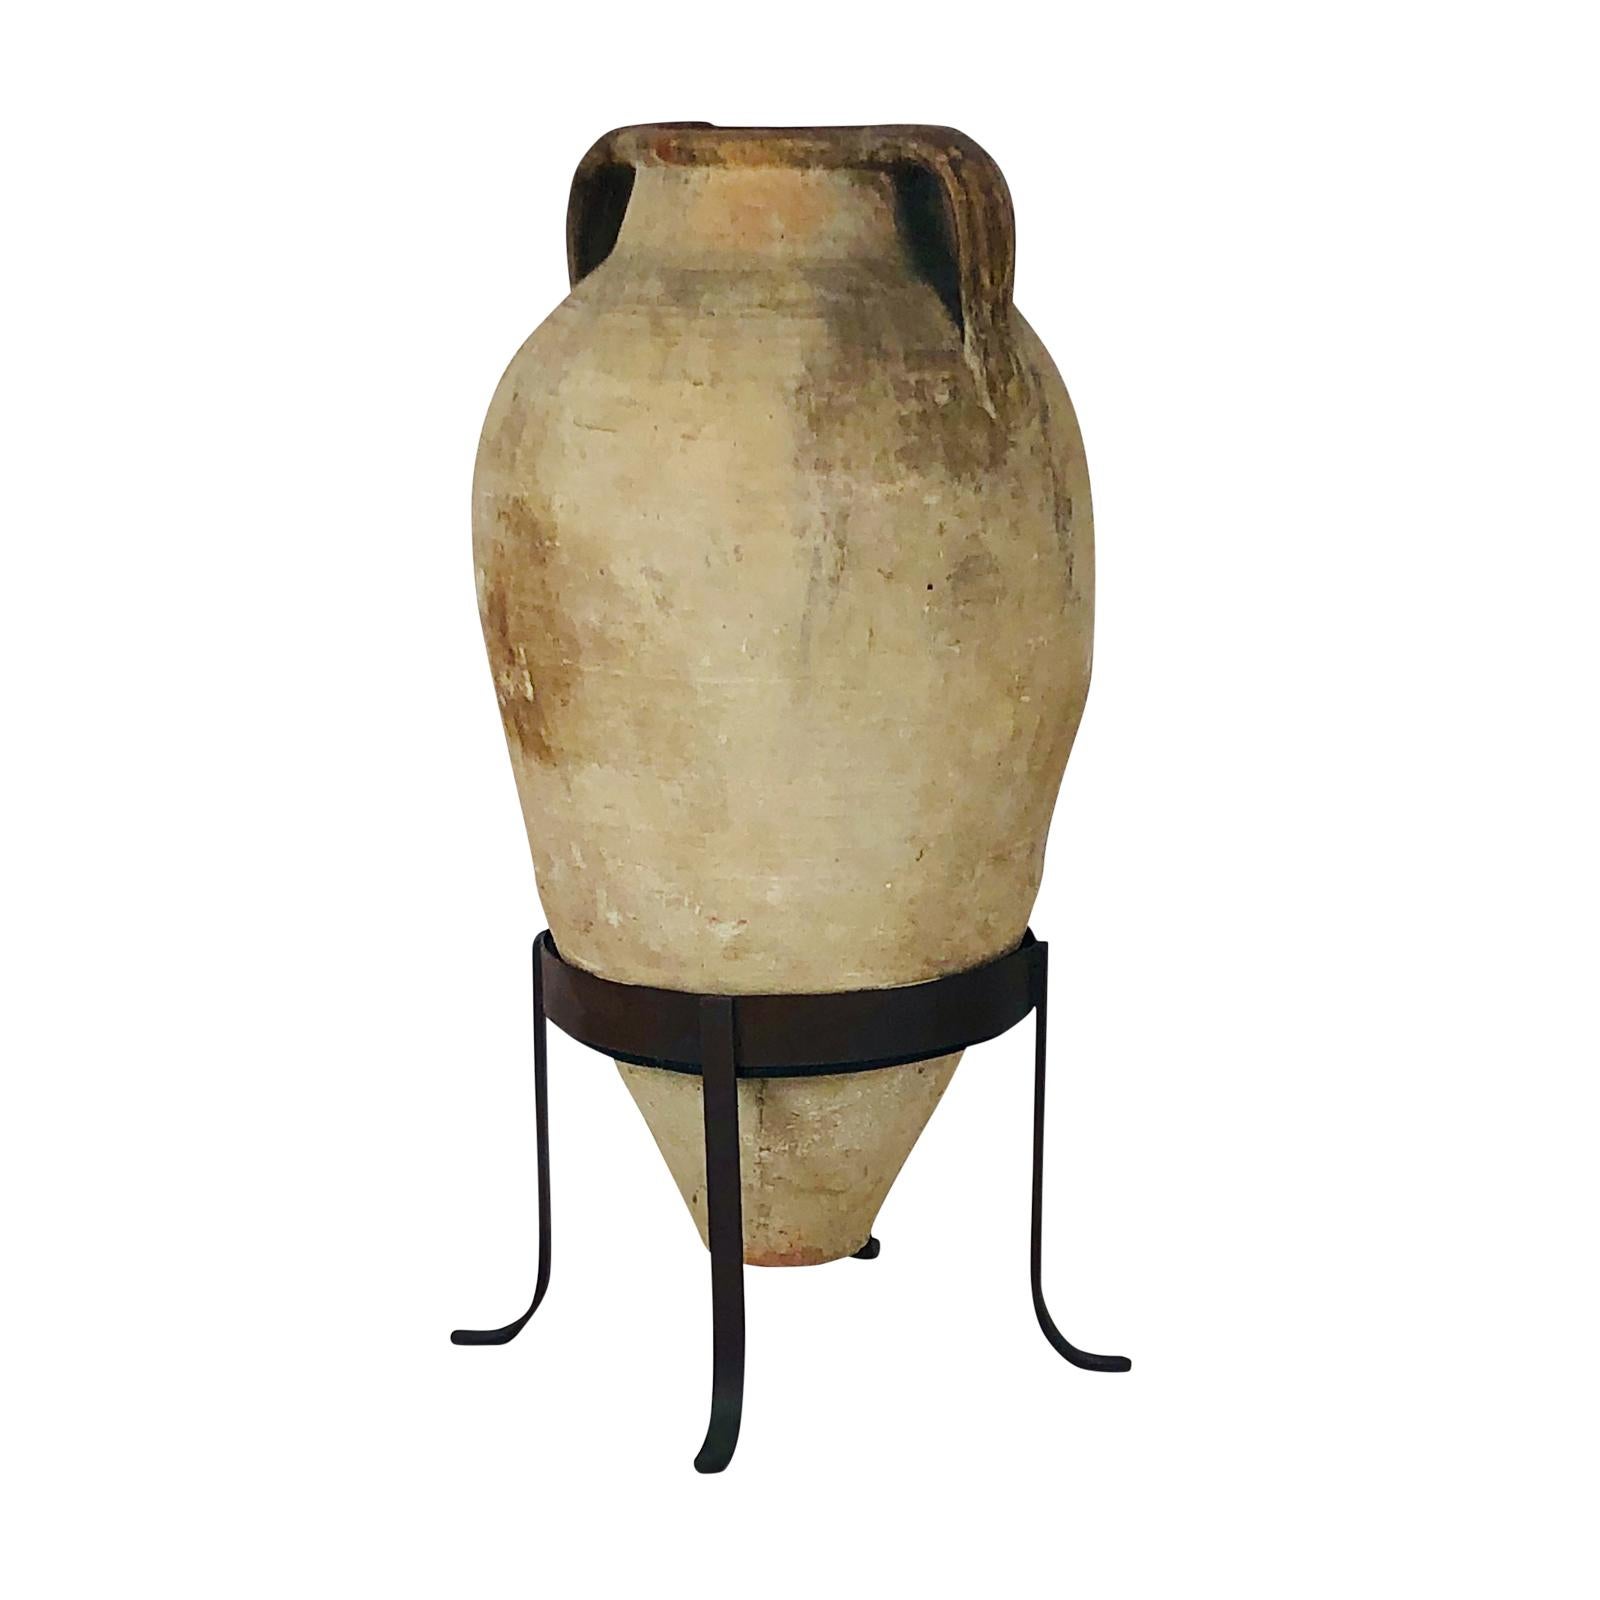 A large and tall pottery amphora from the classical period, circa 300 AD, on a later custom steel stand. These amphora were used throughout the Mediterranean area as storage jars.

 